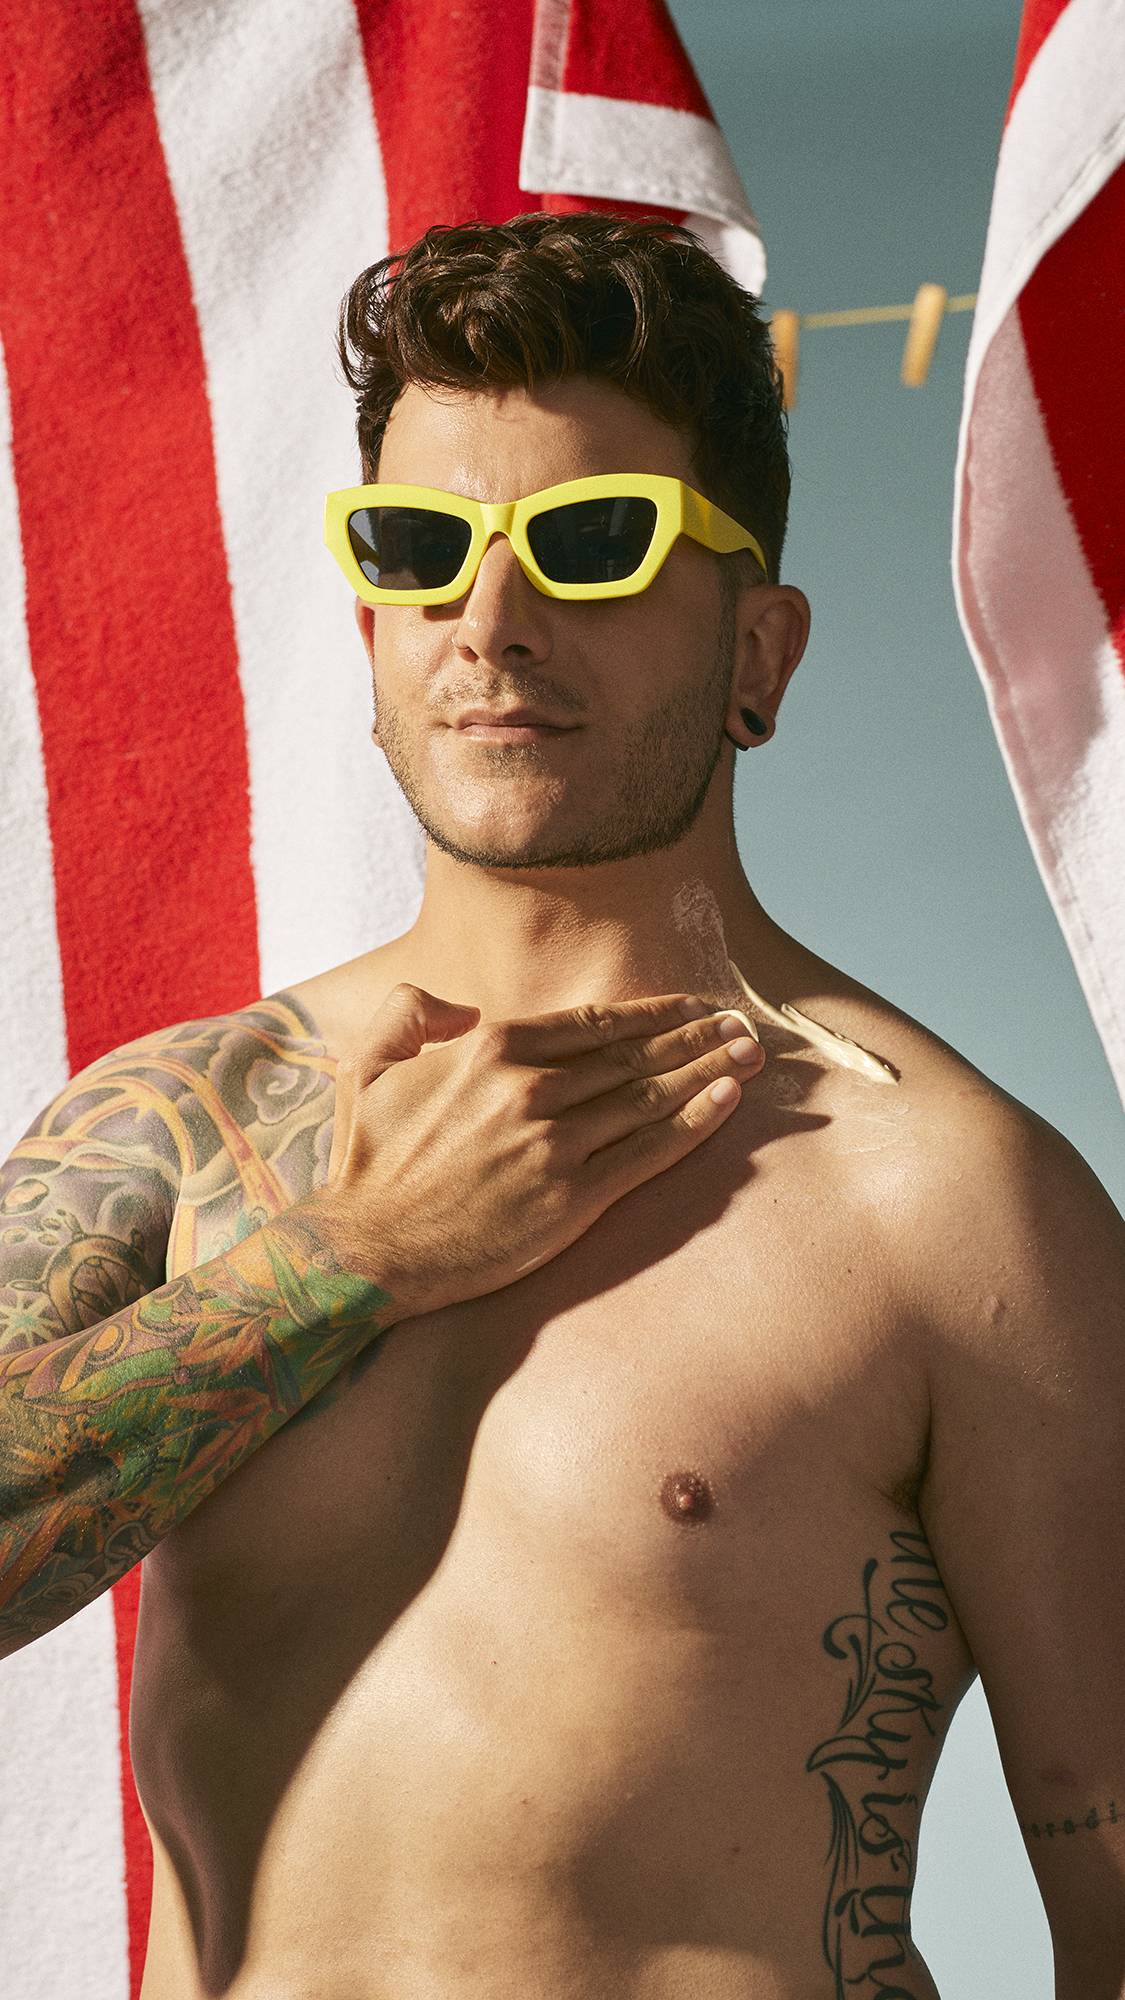 Model is wearing yellow framed sunglasses are they spread the lotion over their neck and chest.